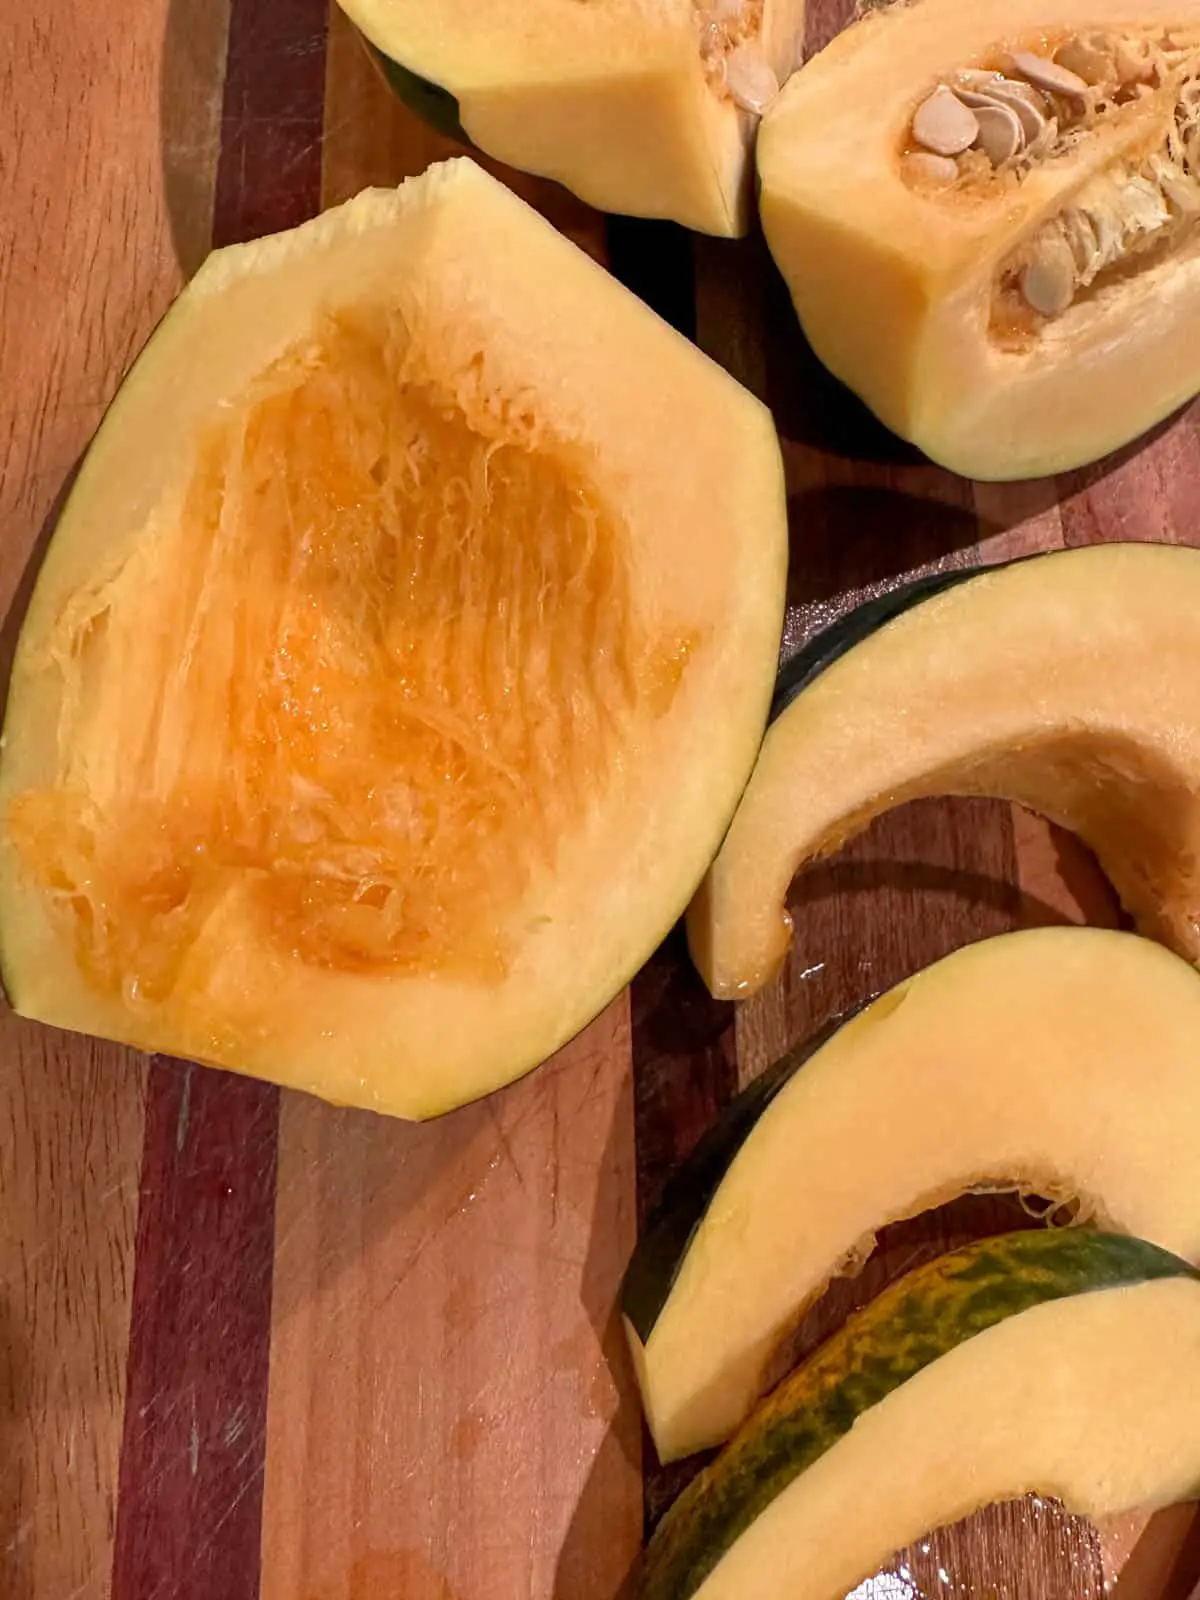 Wedges of acorn squash, a quarter portion of an acorn squash with seeds removed, and 2 large wedges of squash with seeds intact.